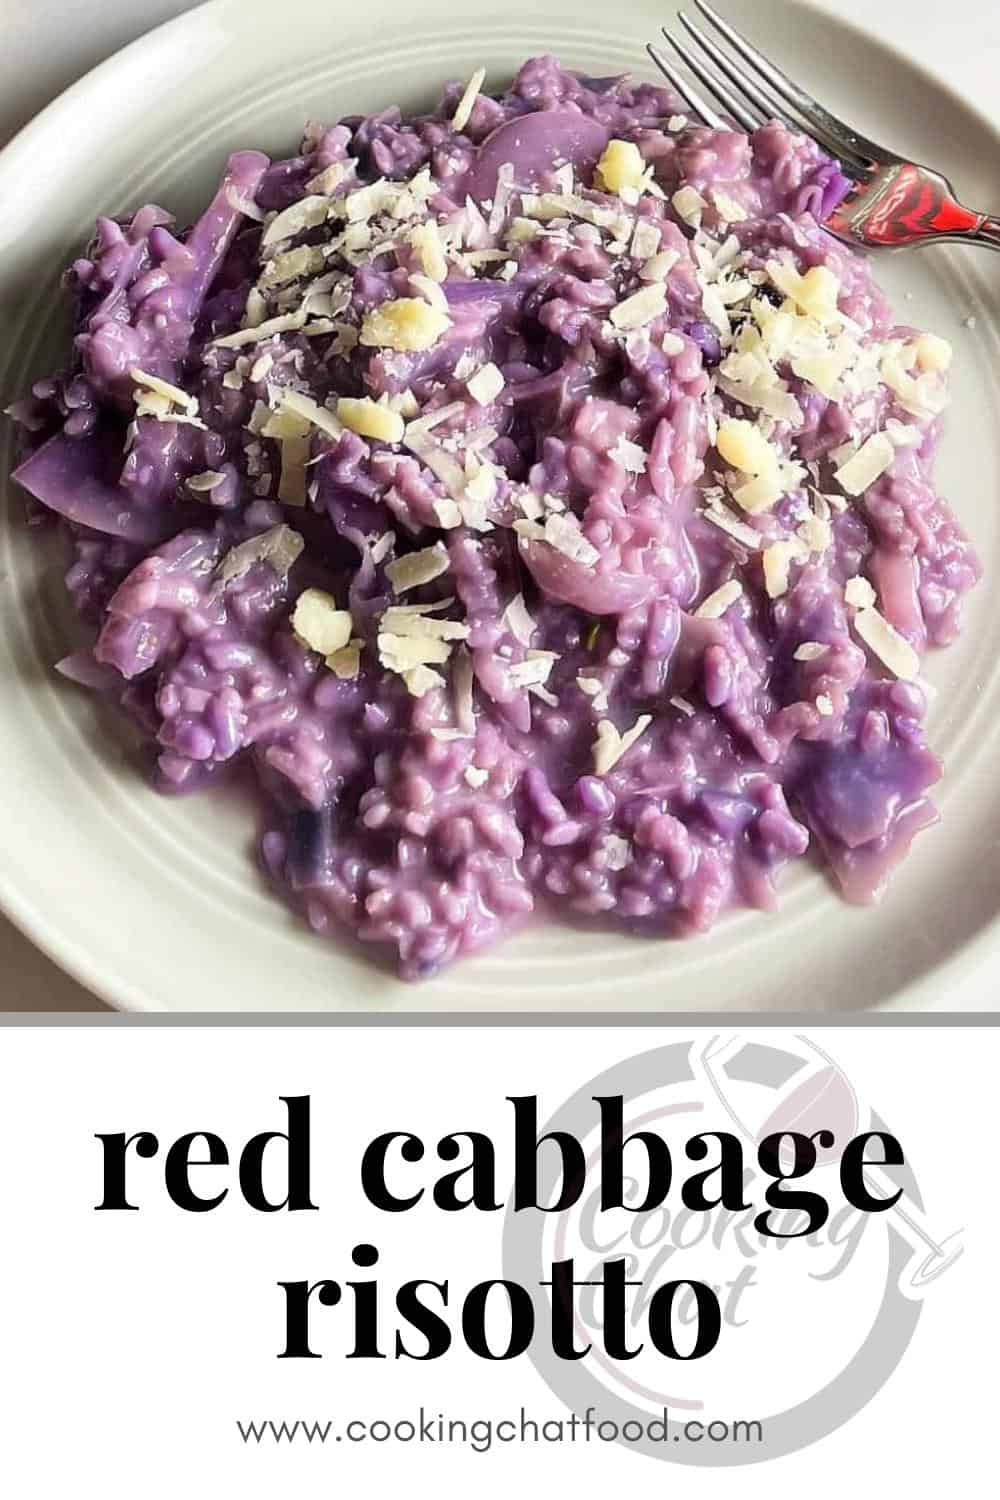 plate with red cabbage risotto, with test underneath that says "red cabbage risotto".